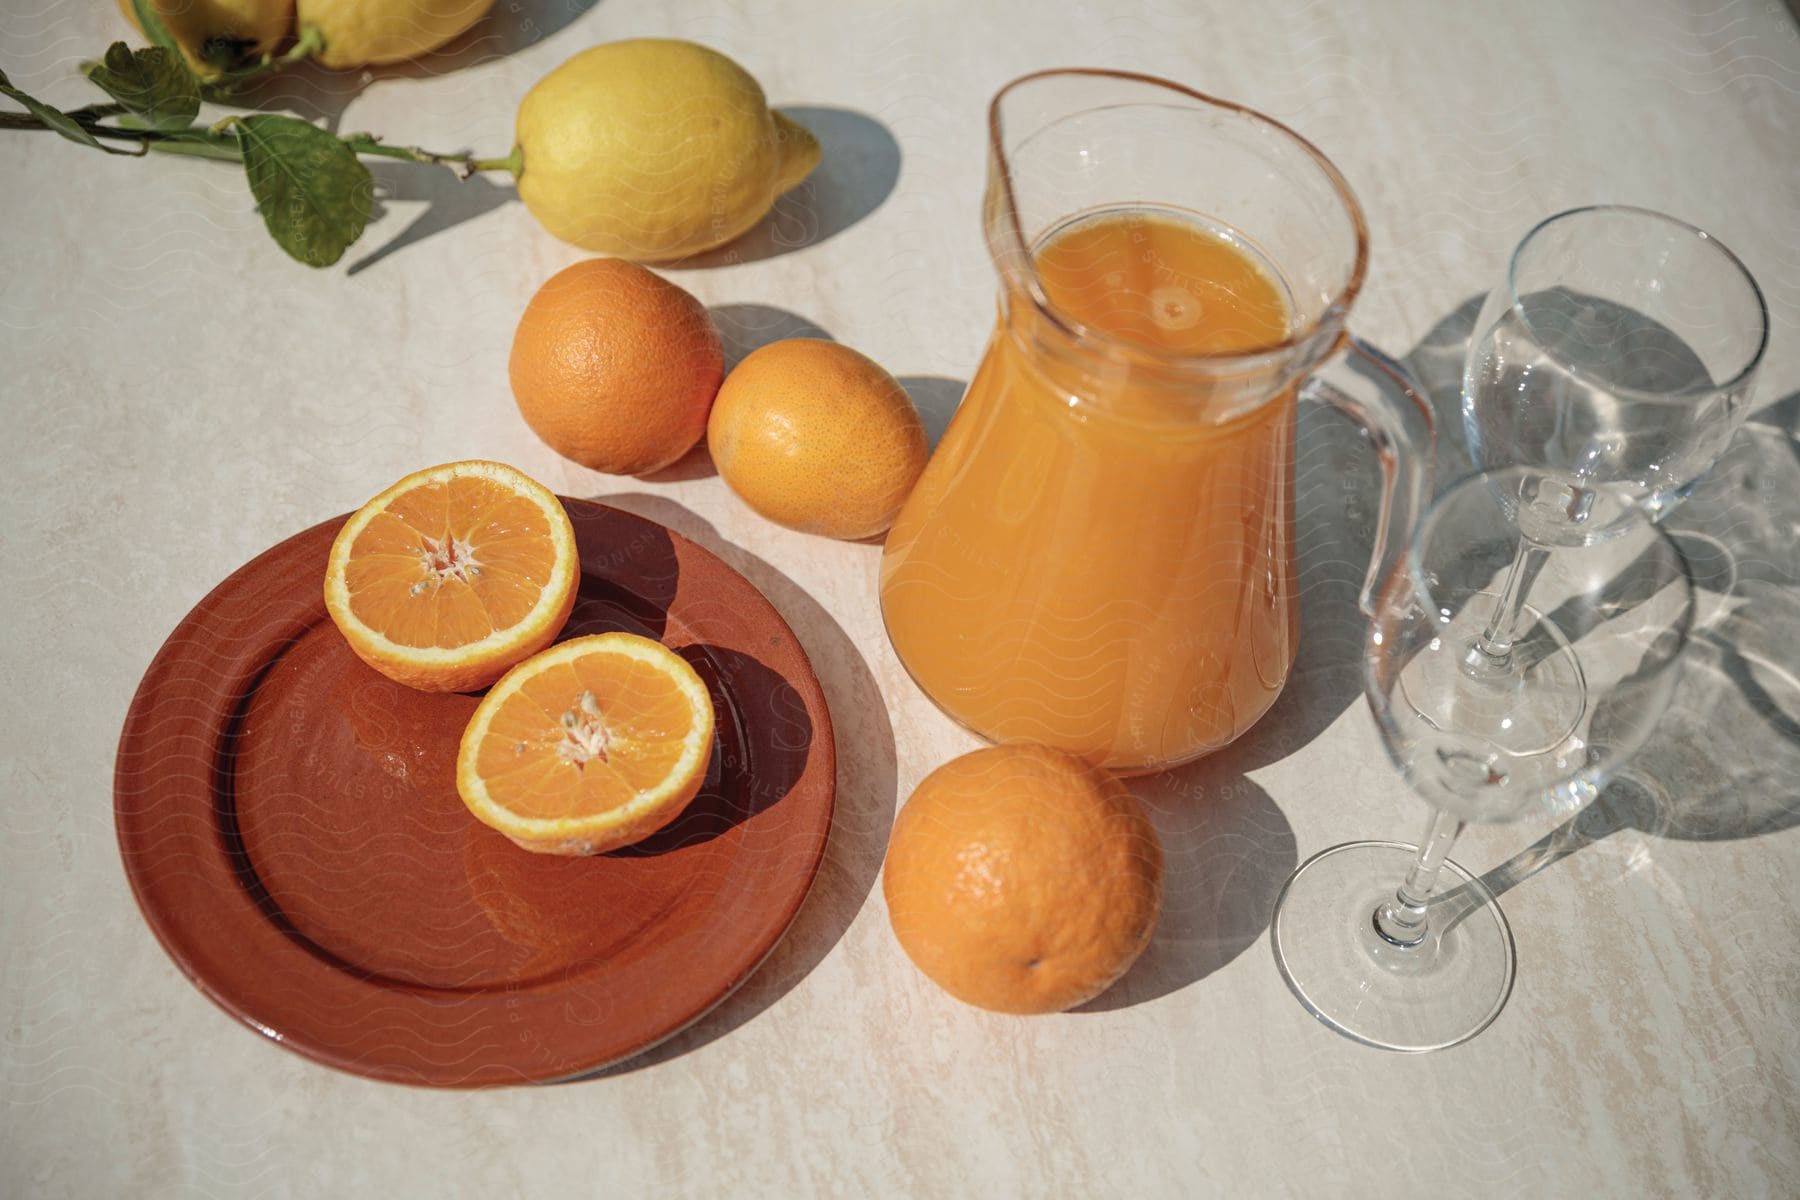 A pitcher of orange juice is surrounded by oranges lemons and tableware